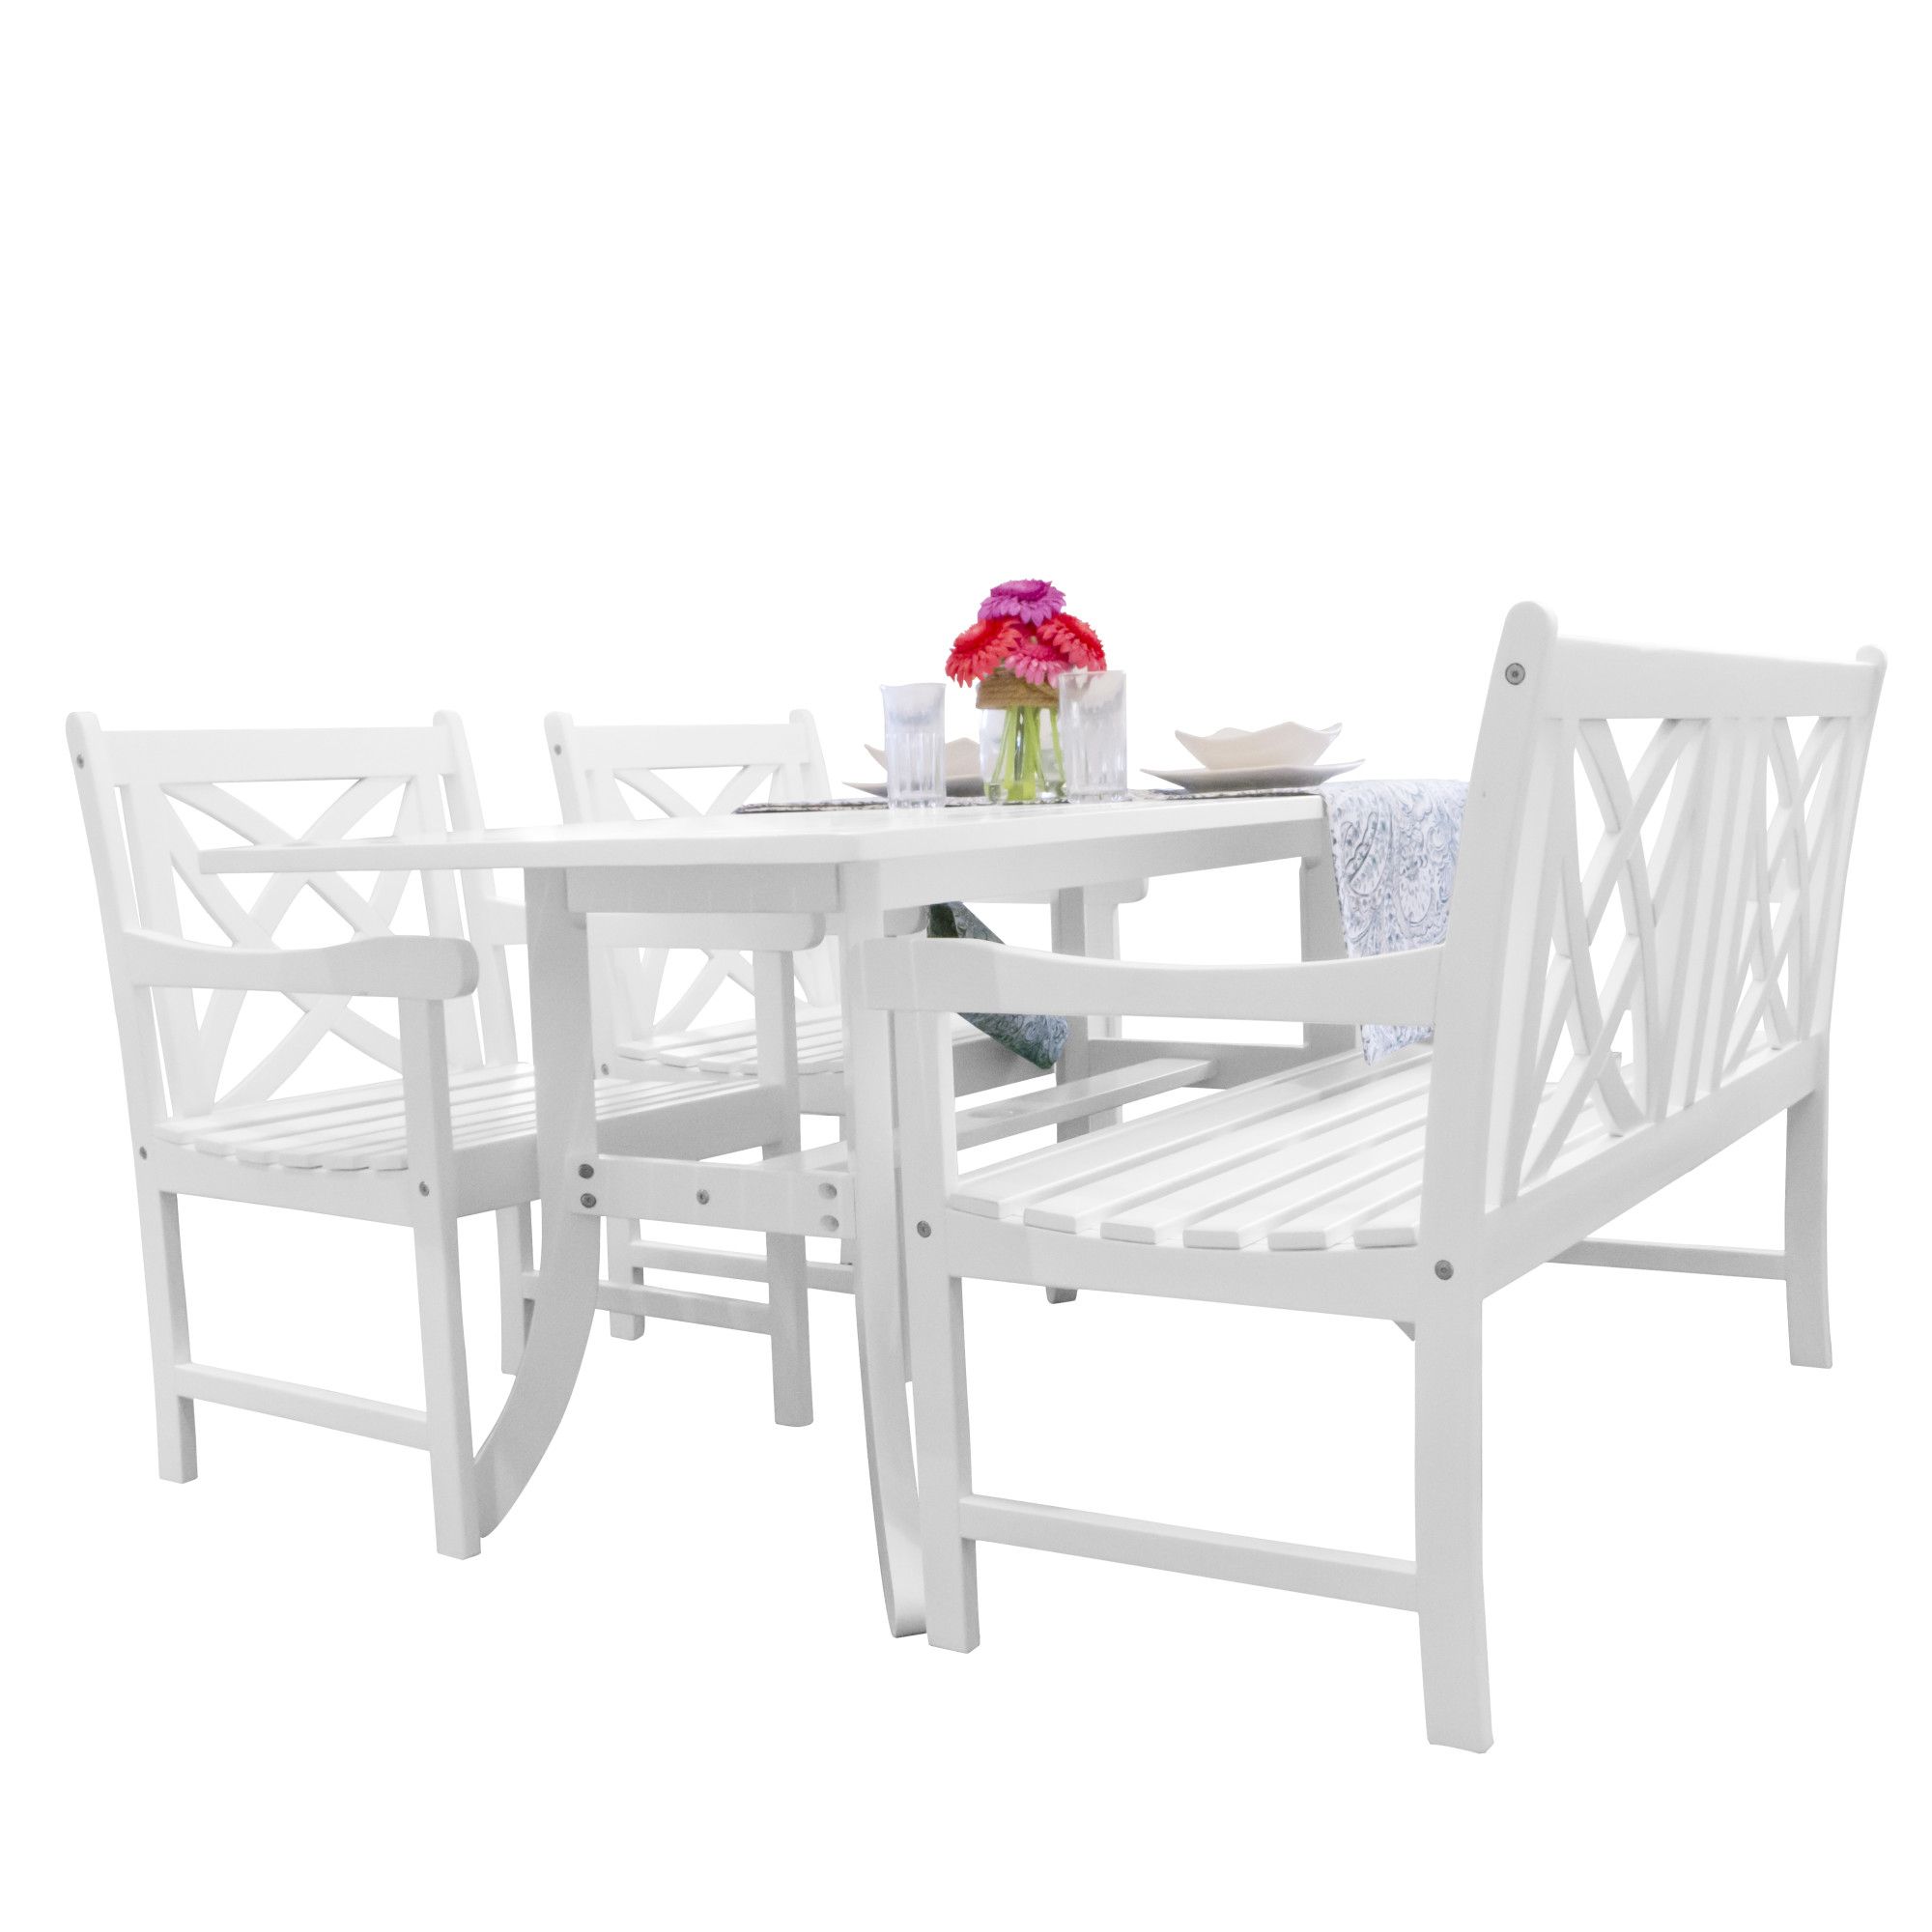 Bradley Outdoor 4 Piece Wood Patio Dining Set With 4 Foot Bench In In White 4 Piece Outdoor Seating Patio Sets (View 5 of 15)